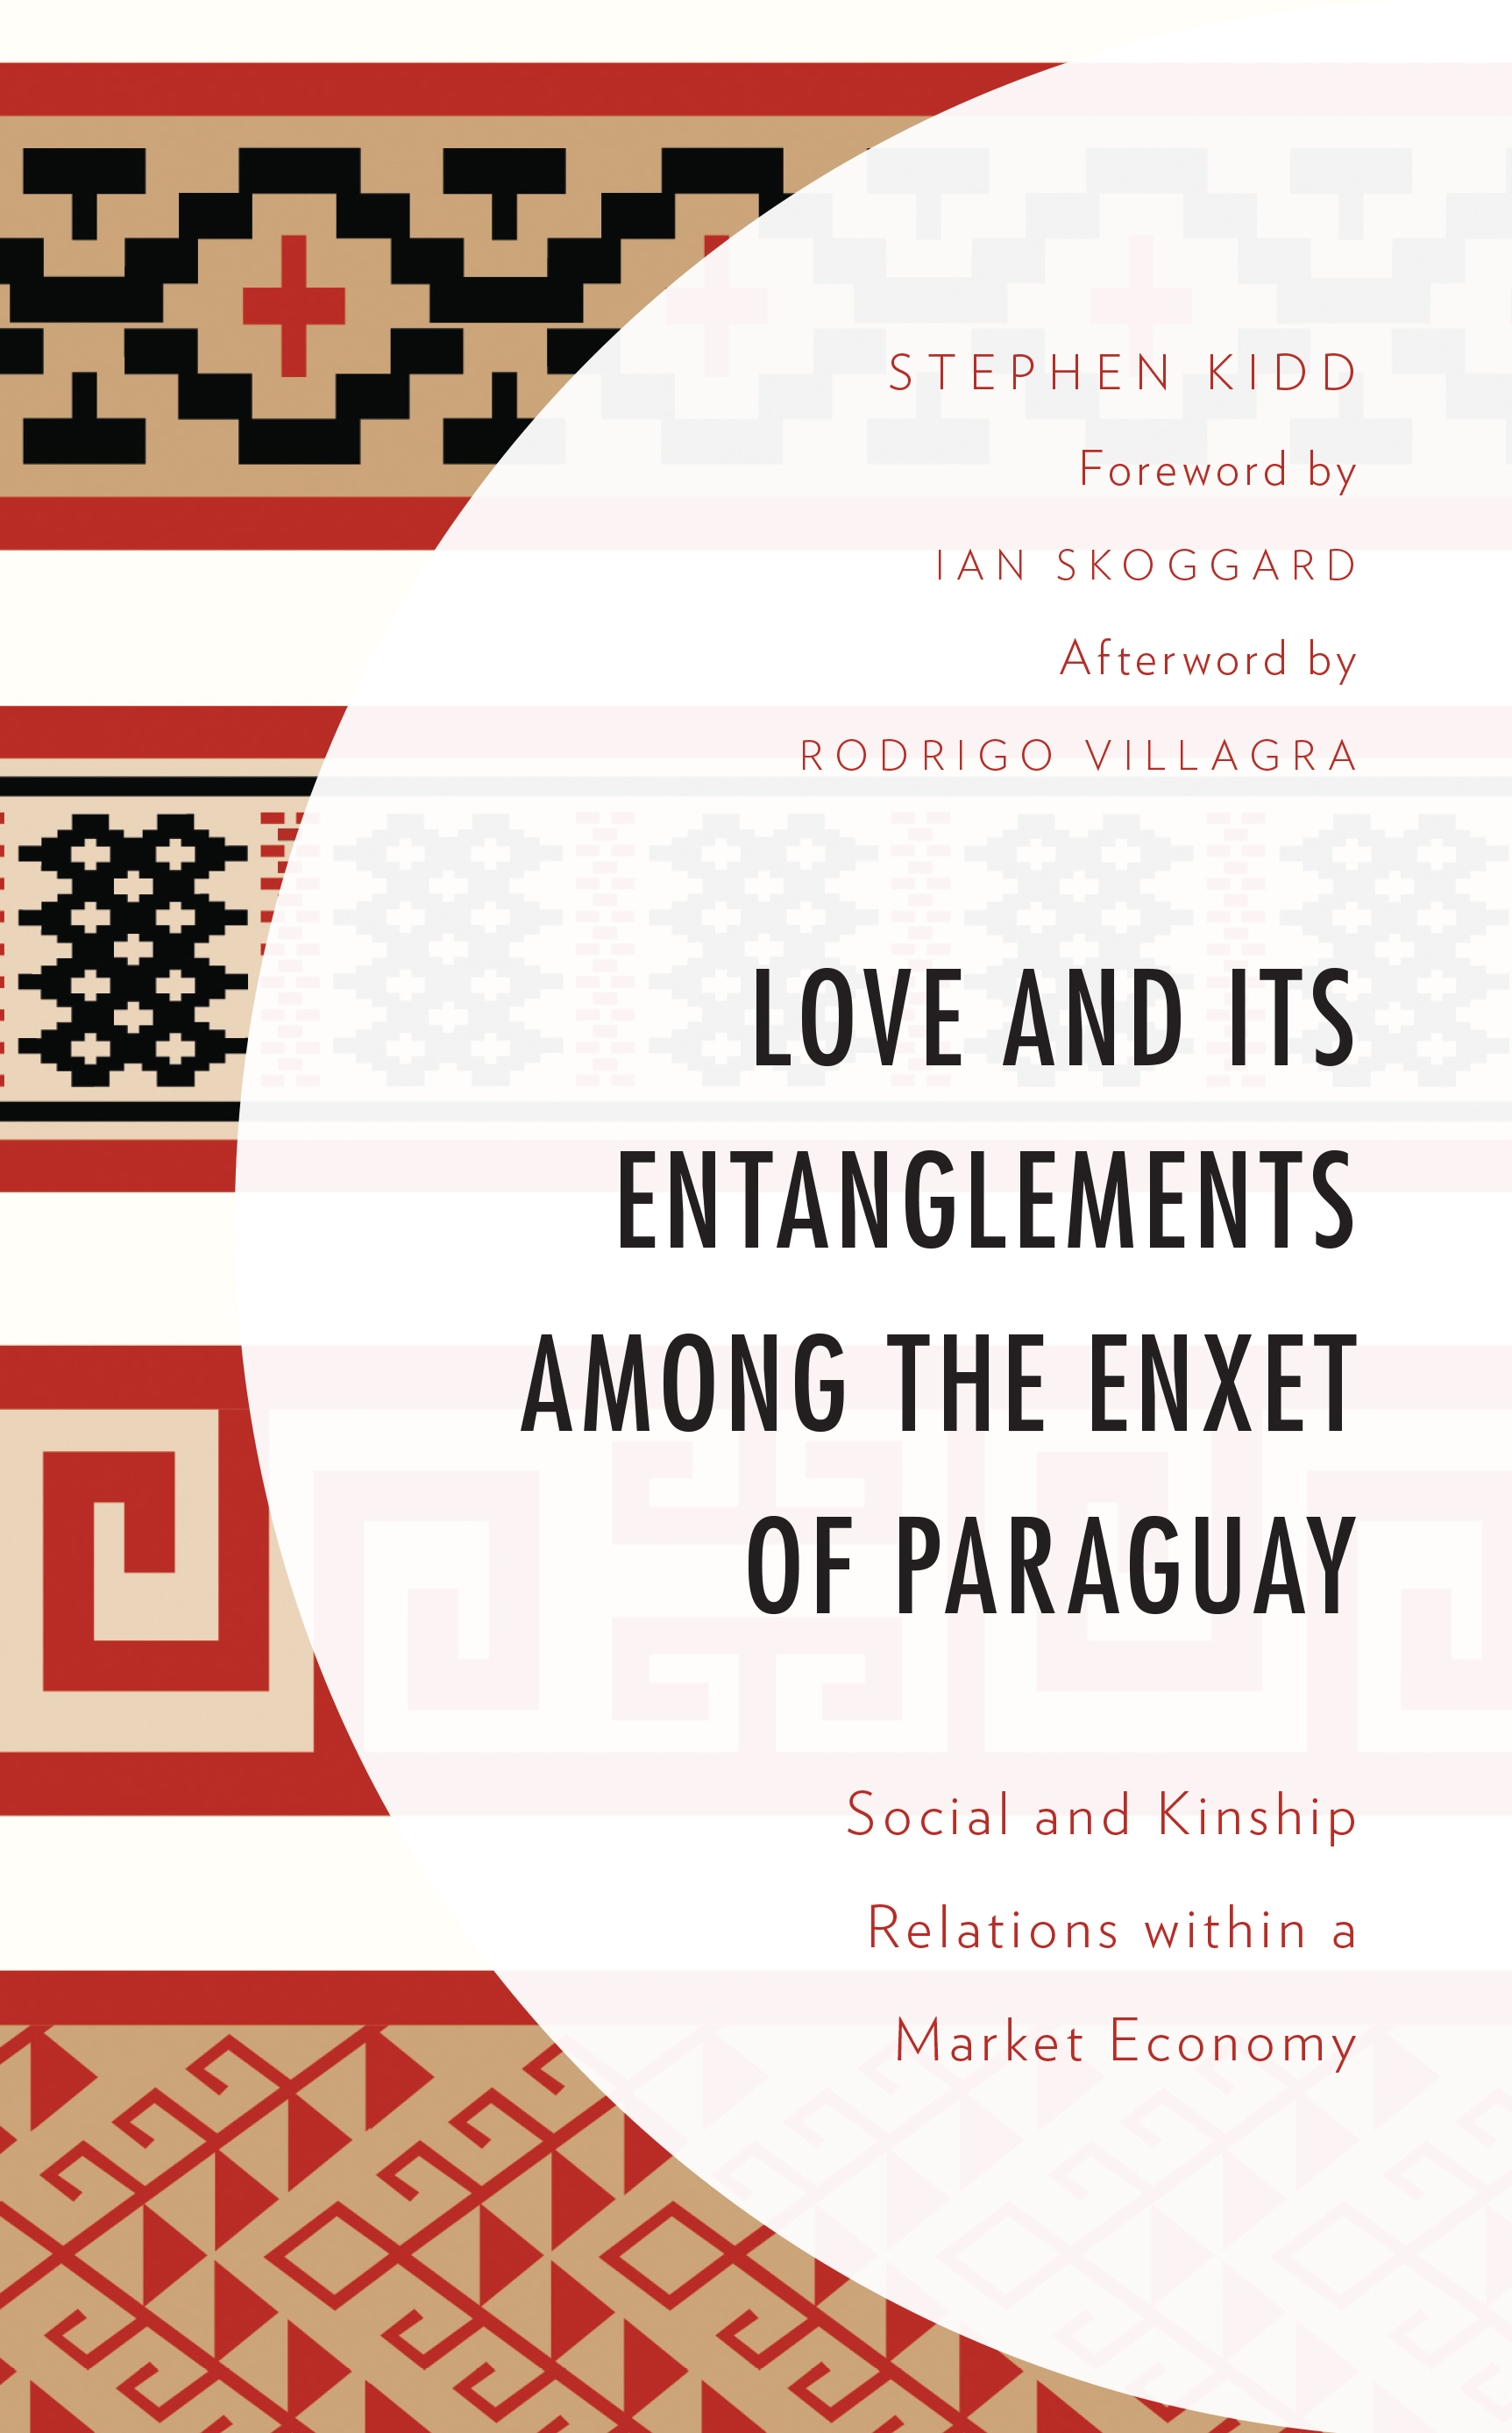 Love and its Entanglements among the Enxet of Paraguay: Social and Kinship Relations within a Market Economy